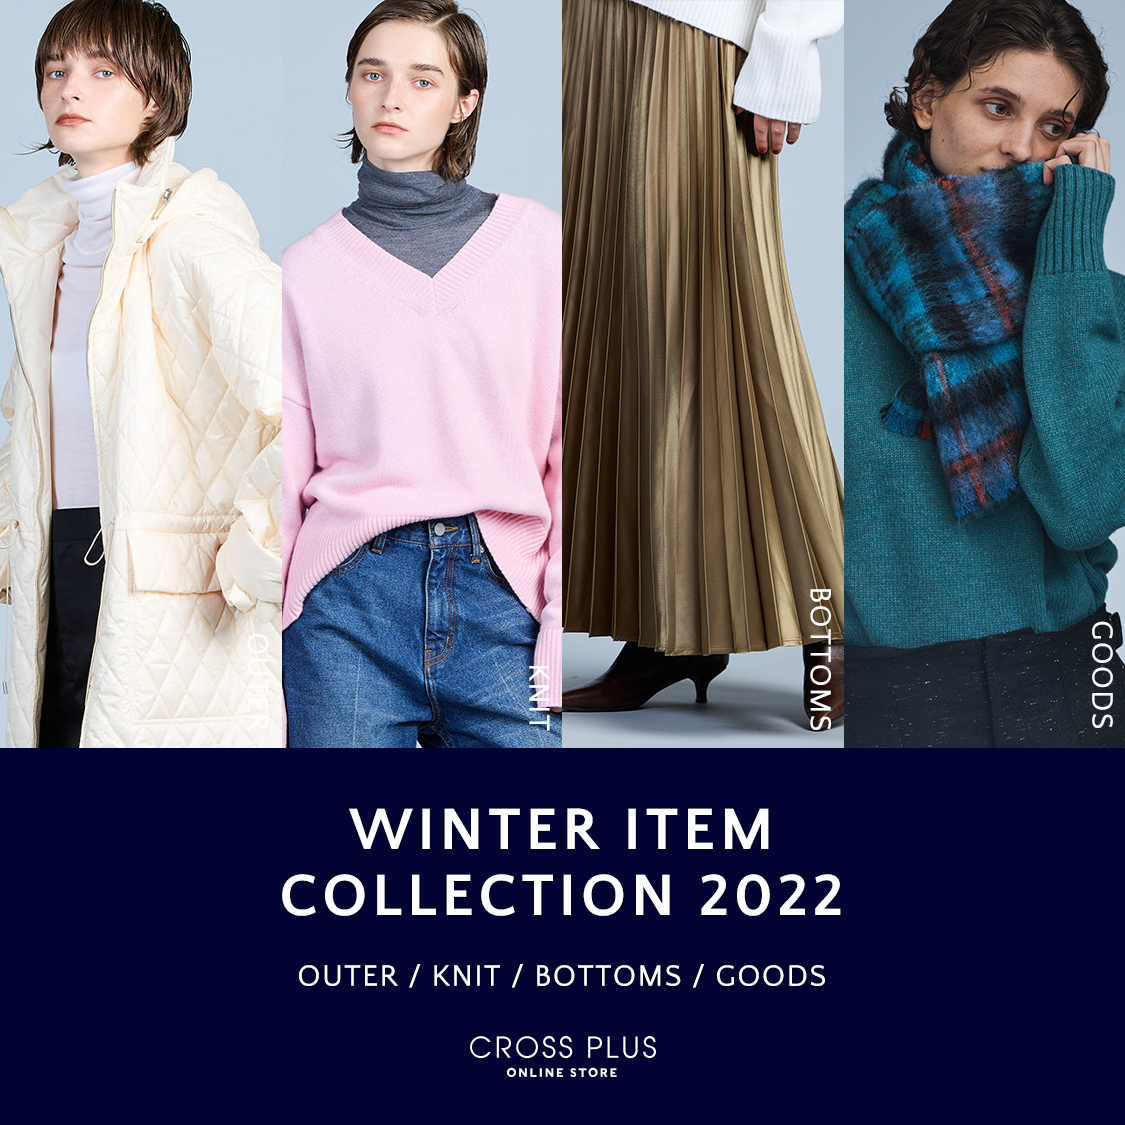 AUTUMN KNIT COLLECTION 2022